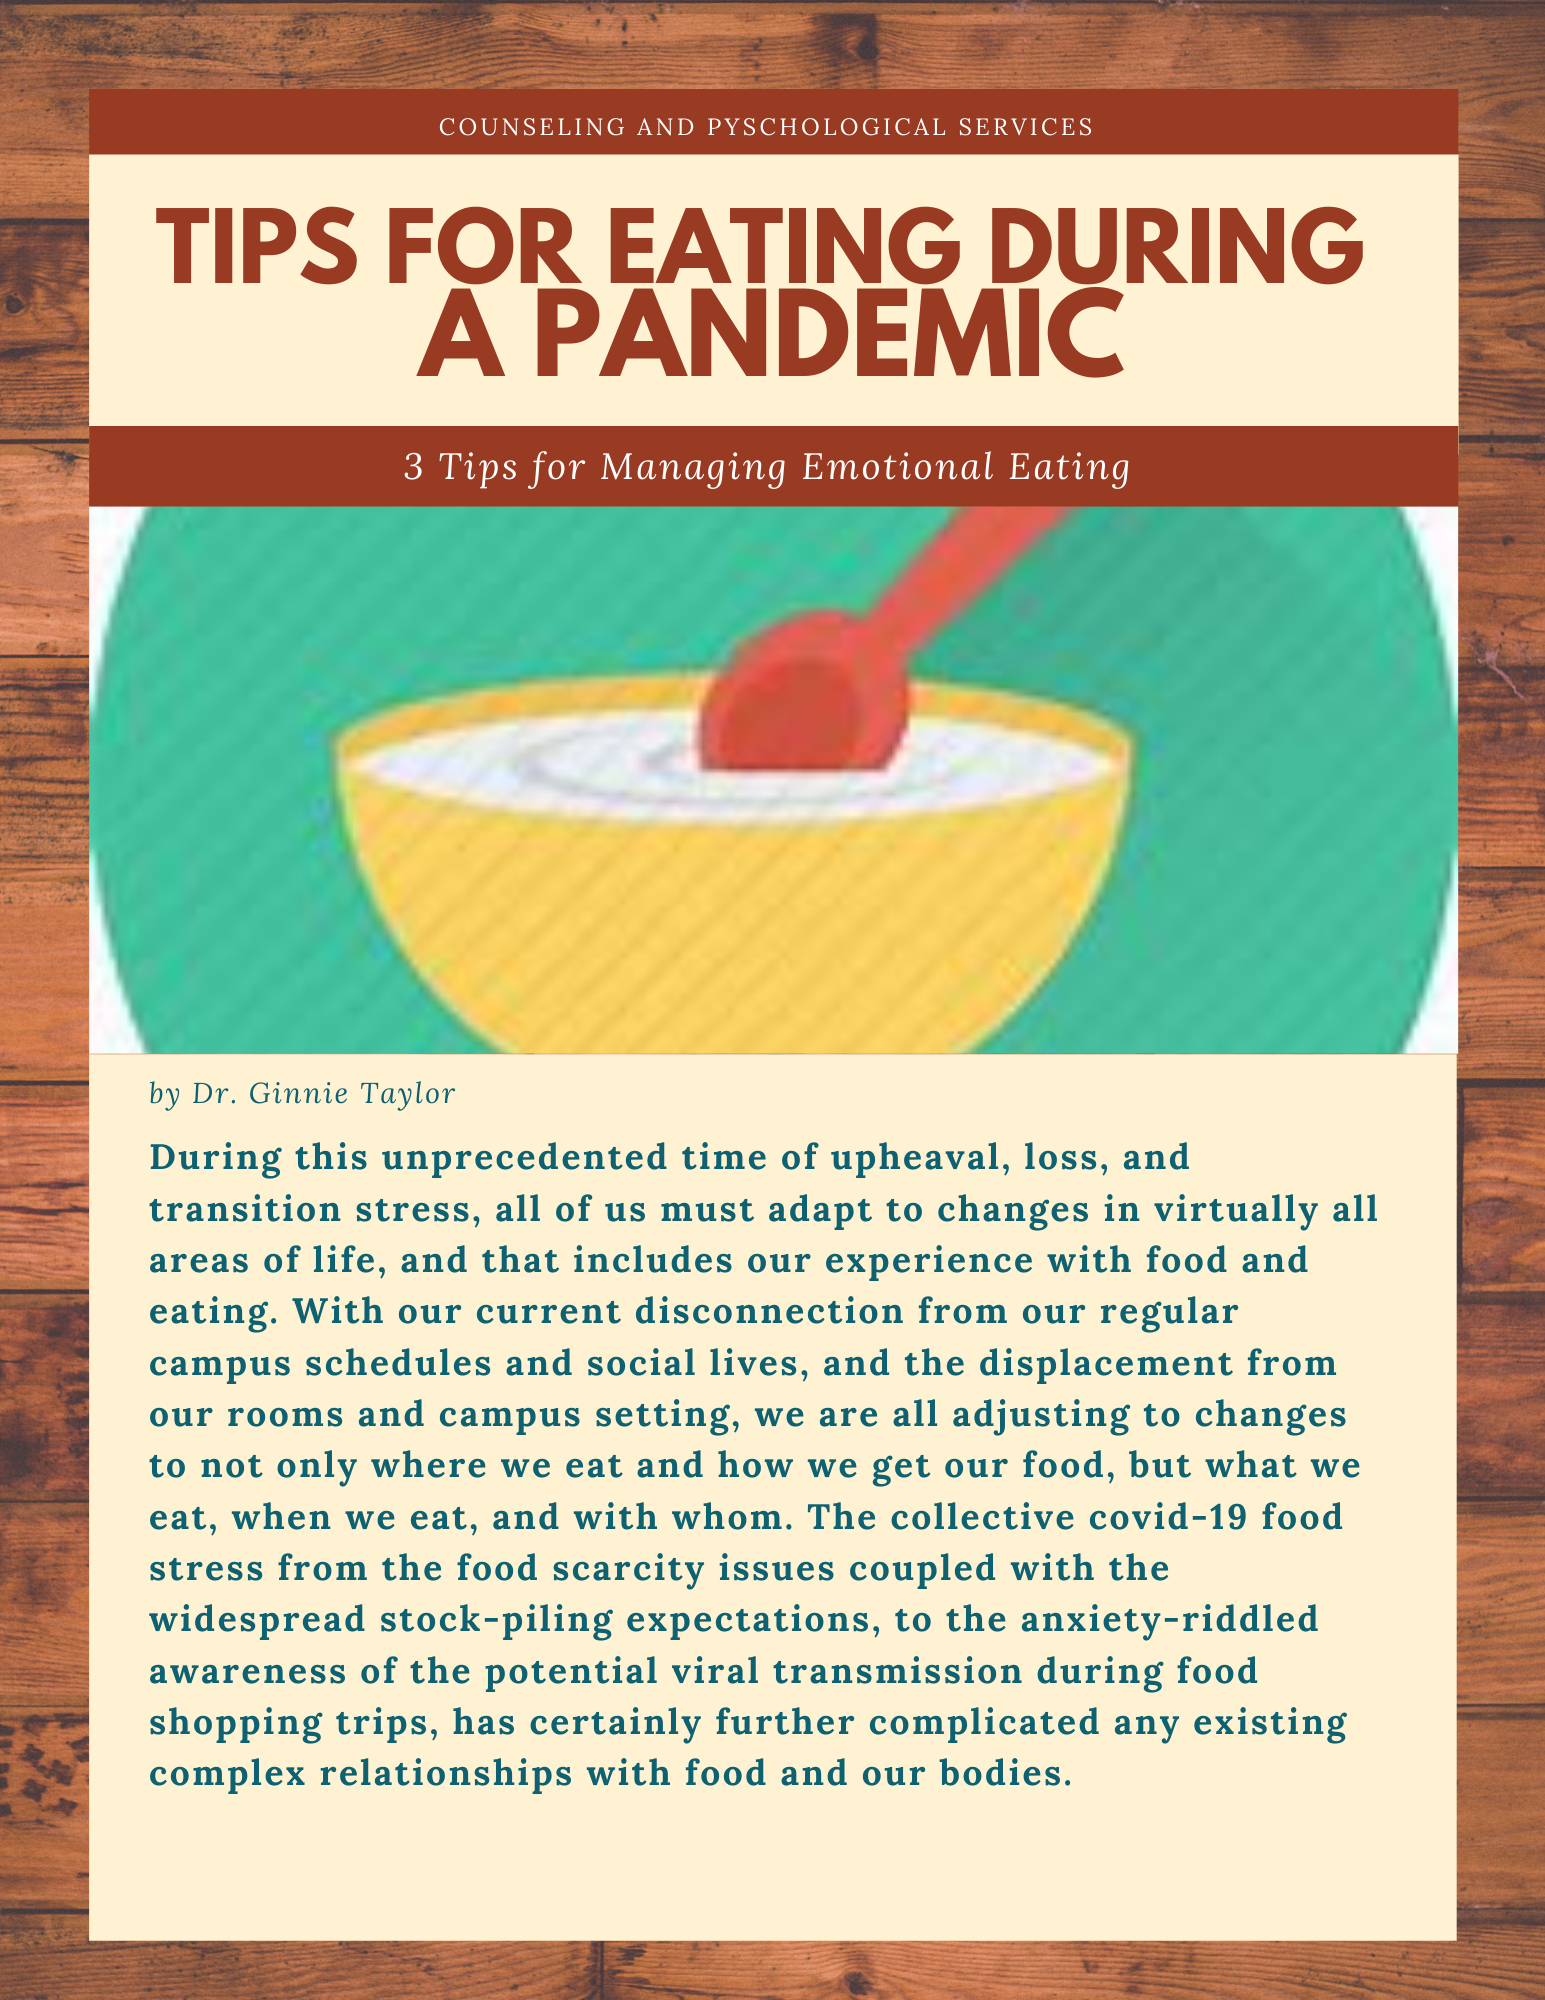 Tips for Eating During A Pandemic